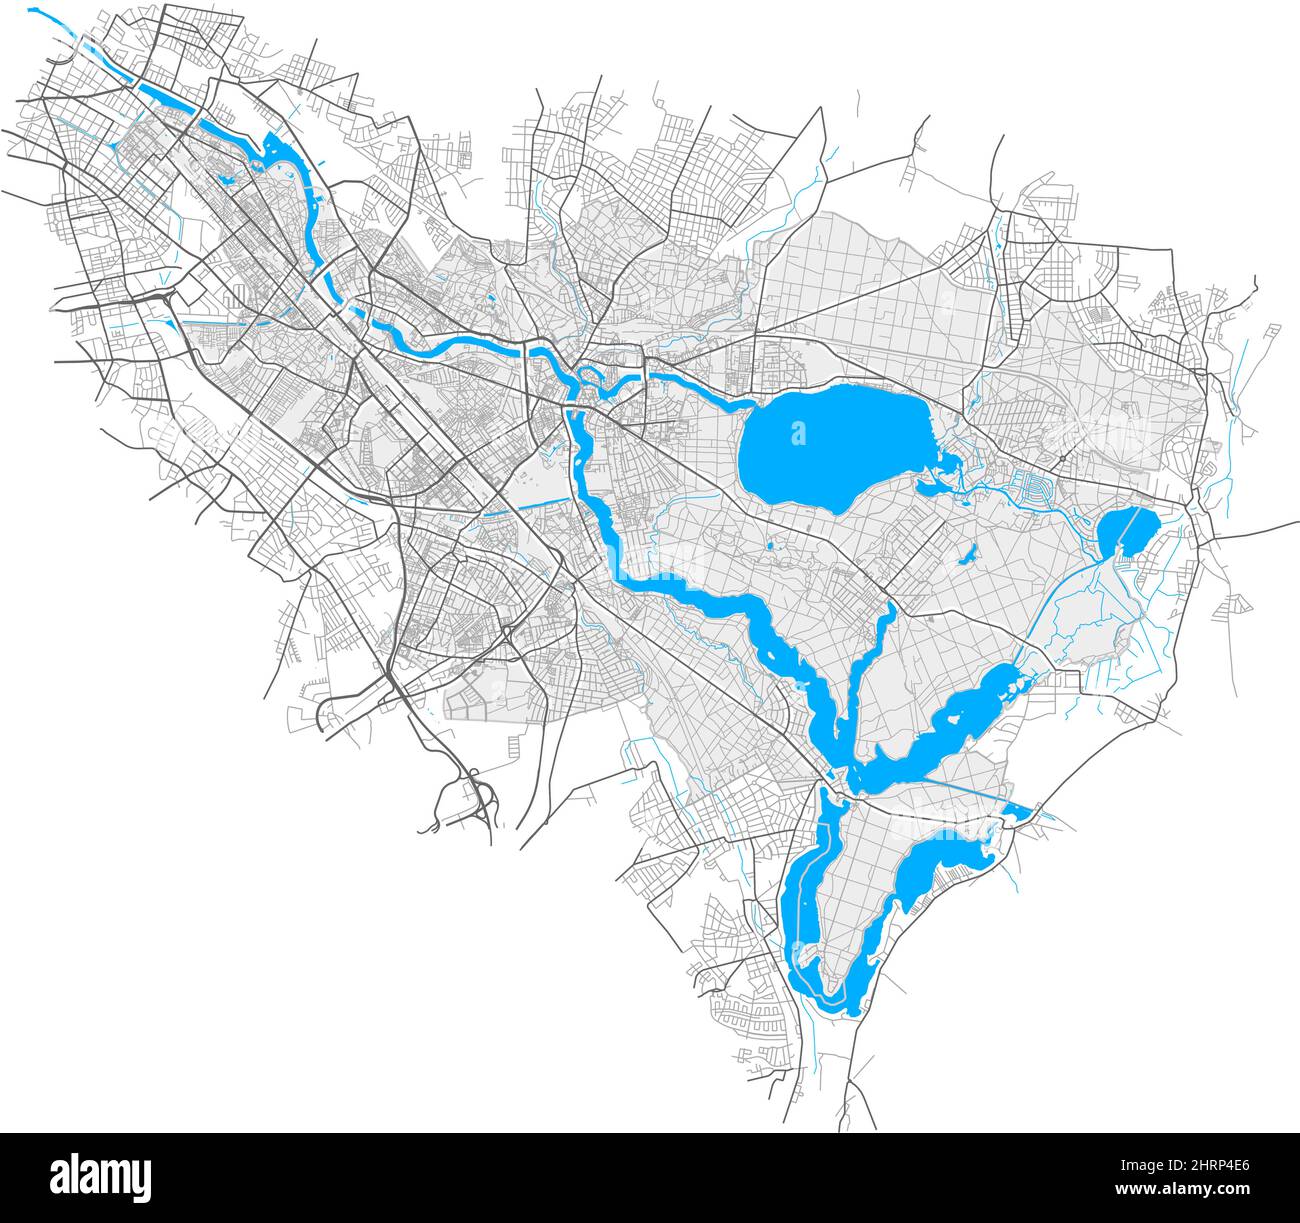 Treptow, Berlin, DEUTSCHLAND, high detail vector map with city boundaries and editable paths. White outlines for main roads. Many smaller paths. Blue Stock Vector